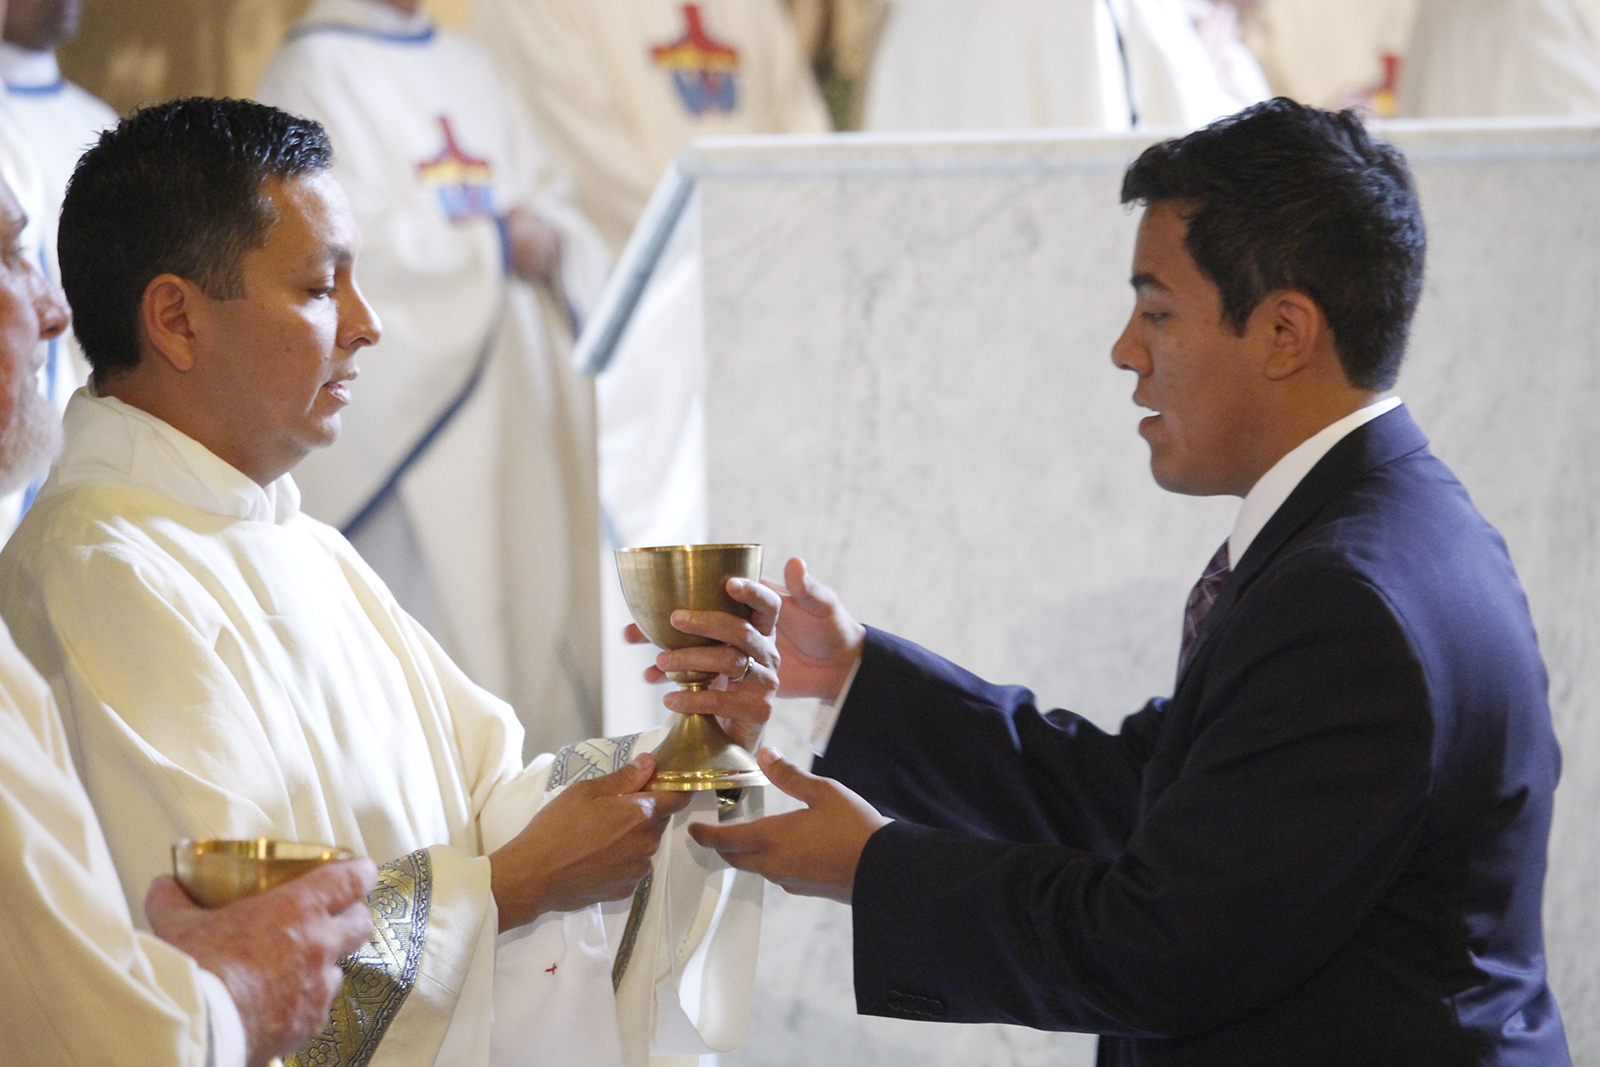 Dcn. Billy Chavira gives the Precious Blood to his son for the first time as a deacon at his ordination Mass at Ss Simon and Jude Cathedral Nov. 5. Dcn. Chavira will be serving at St. Thomas the Apostle Parish.